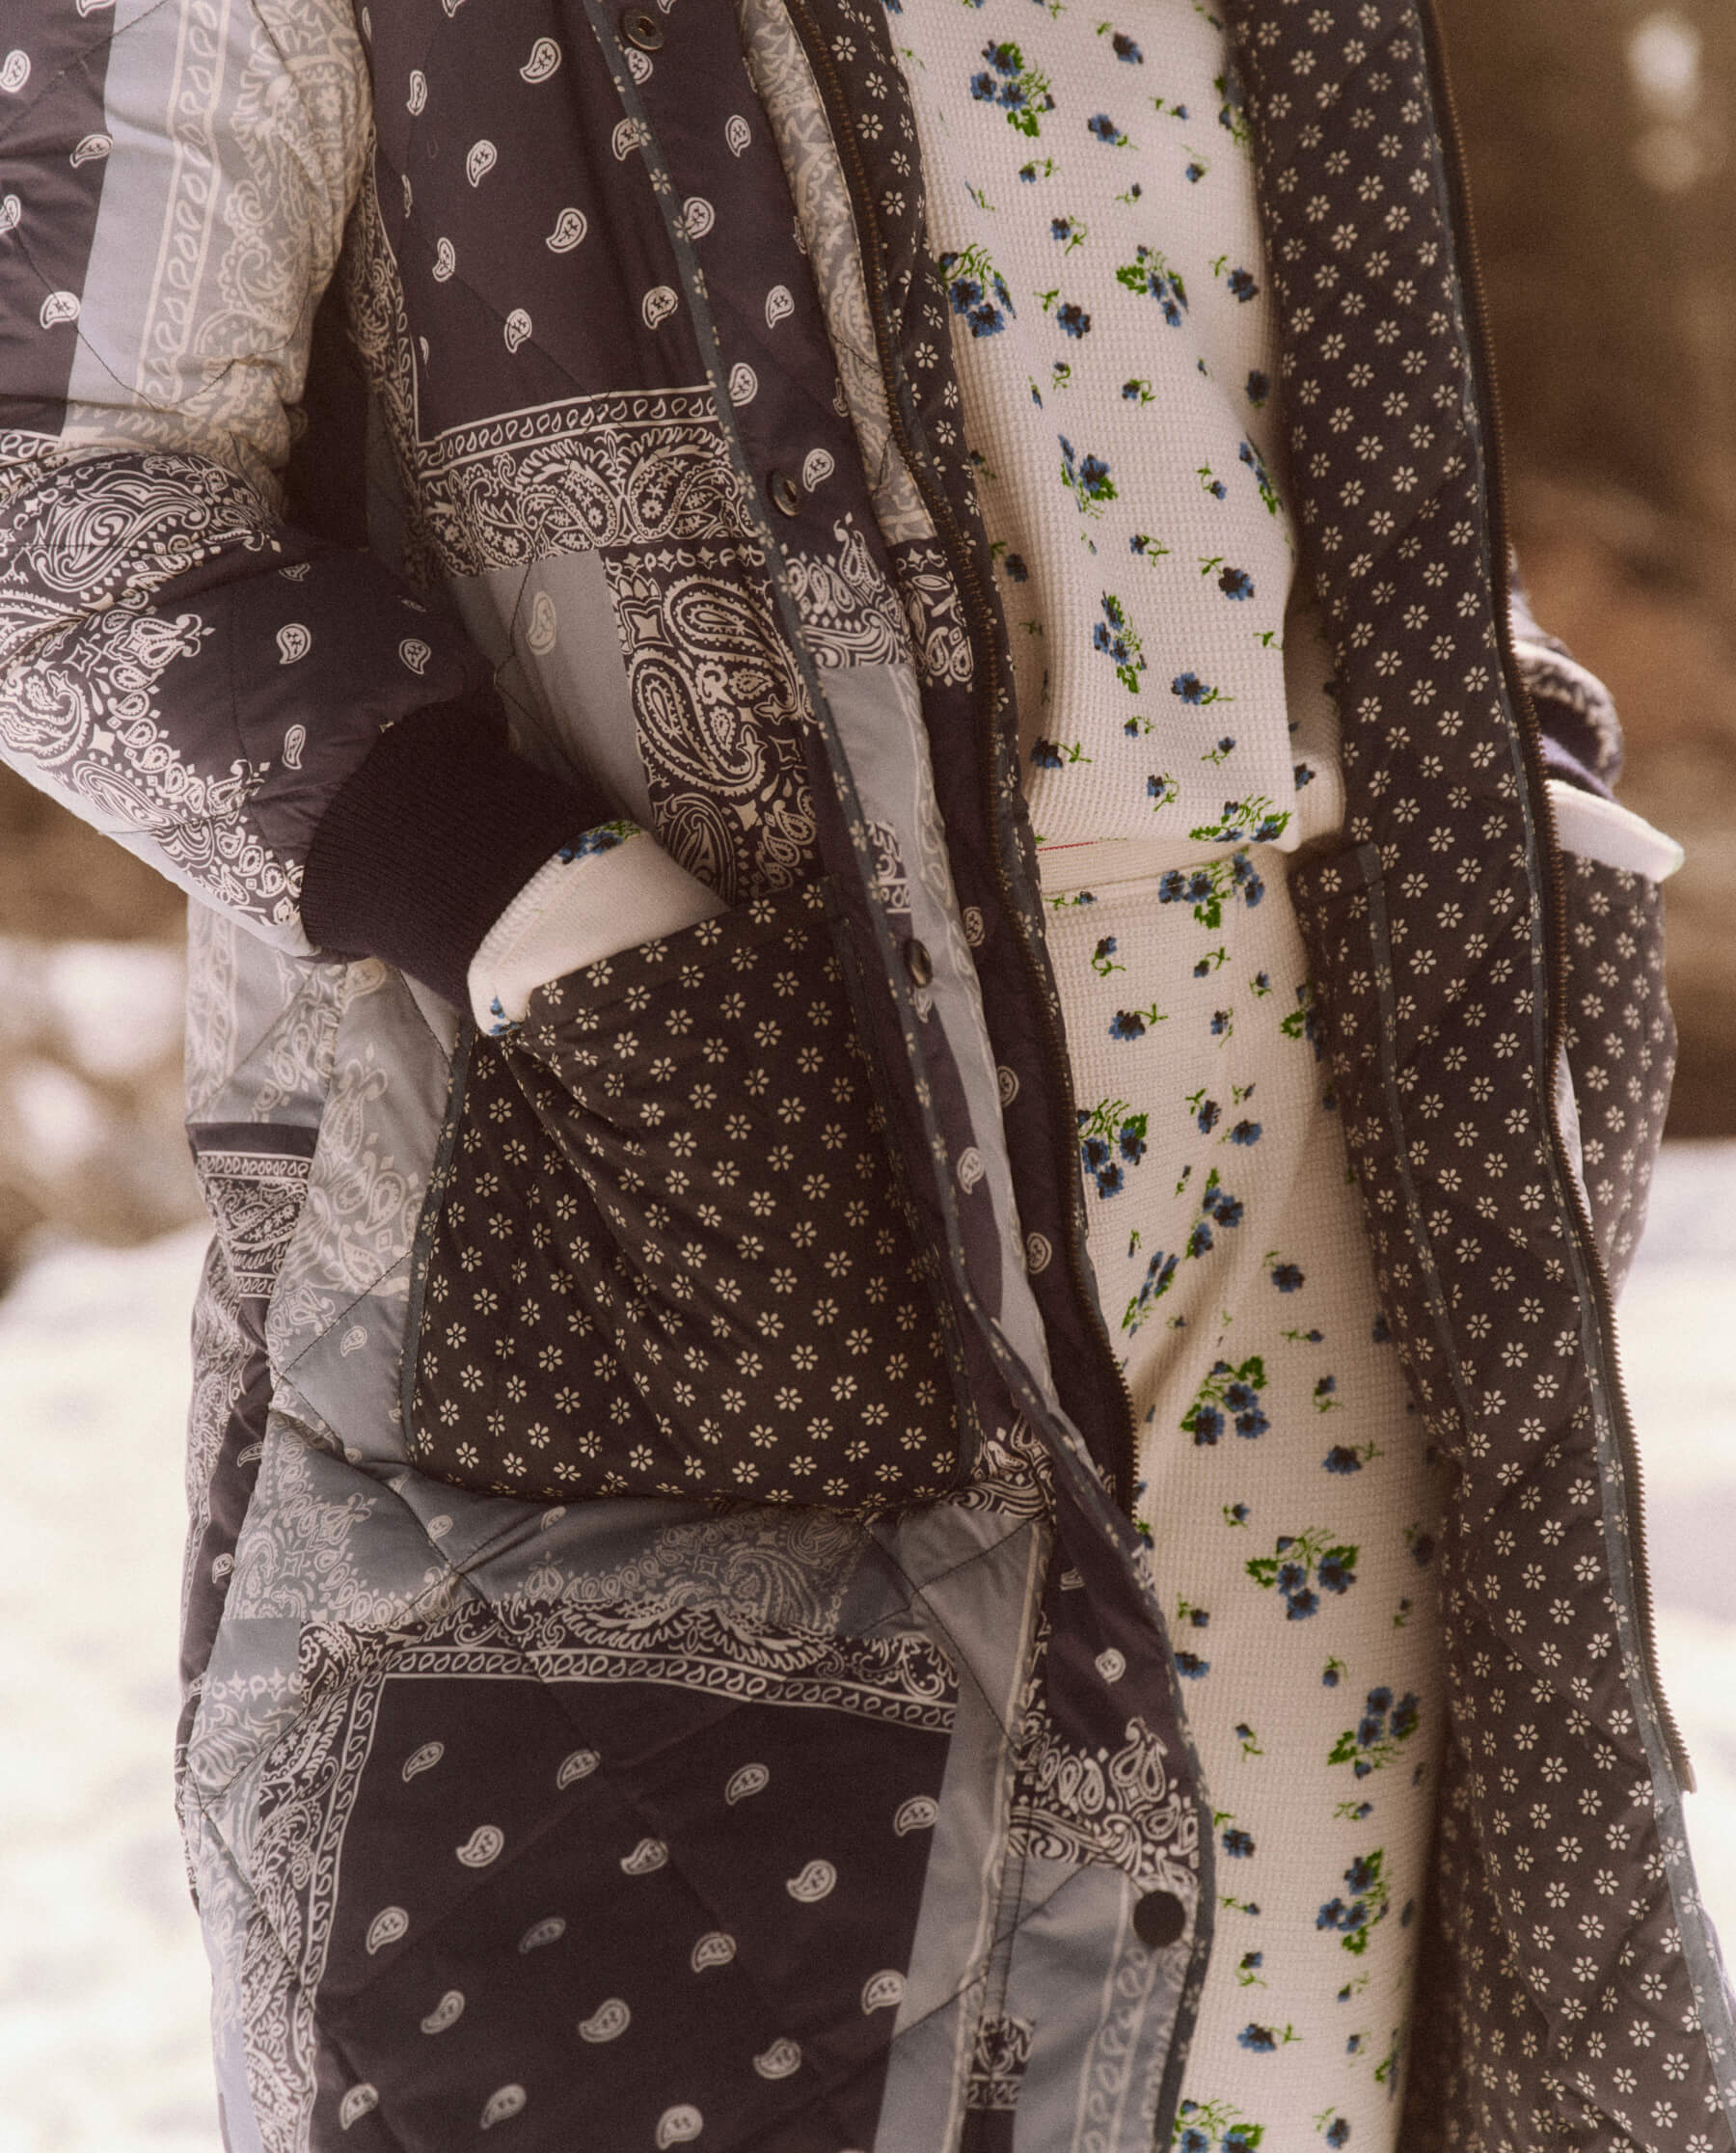 The Reversible Down Storm Puffer. -- Patchwork Bandana and Dewdrop Floral JACKET THE GREAT. FALL 23 TGO SALE